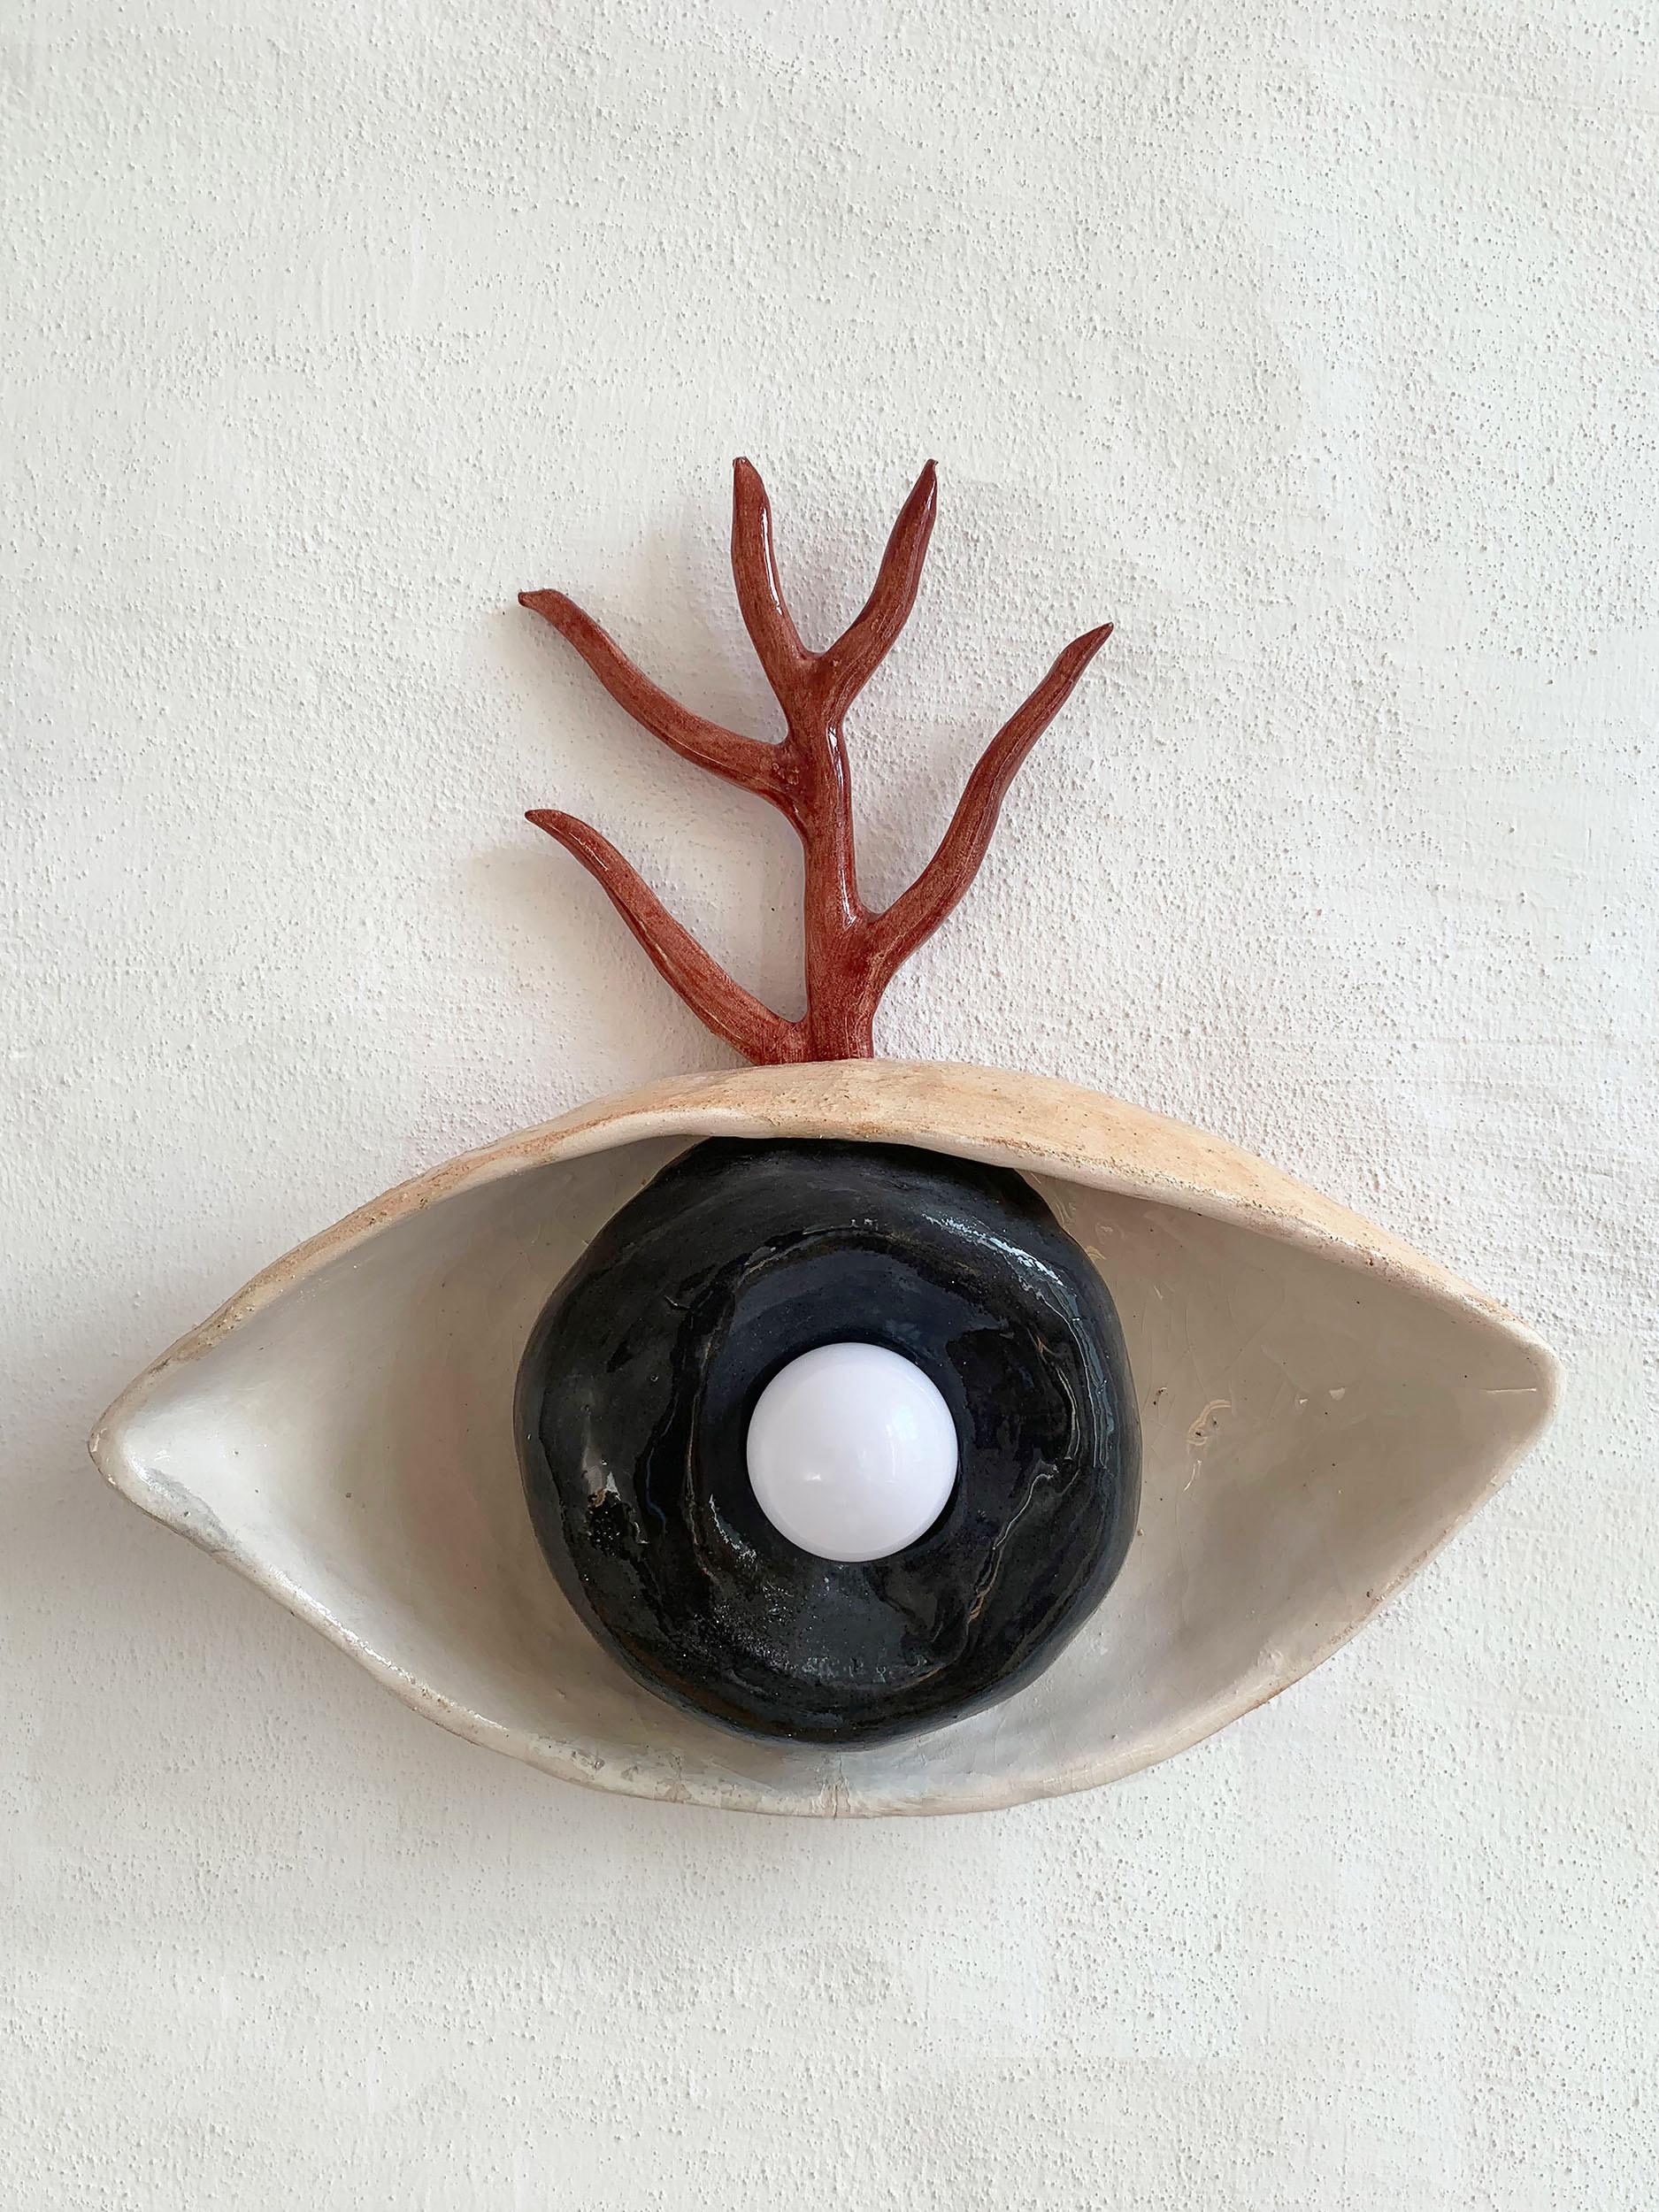 Dal Wall Lamp by Nana Zaalishvili
Dimensions: Ø 30 x H 35 cm.
Materials: Glazed clay.

The wall lamp ‘Dal’ was created under the influence of Svan mythology. The eye symbolizes the most necessary skill for the hunter, while the glazed clay branch